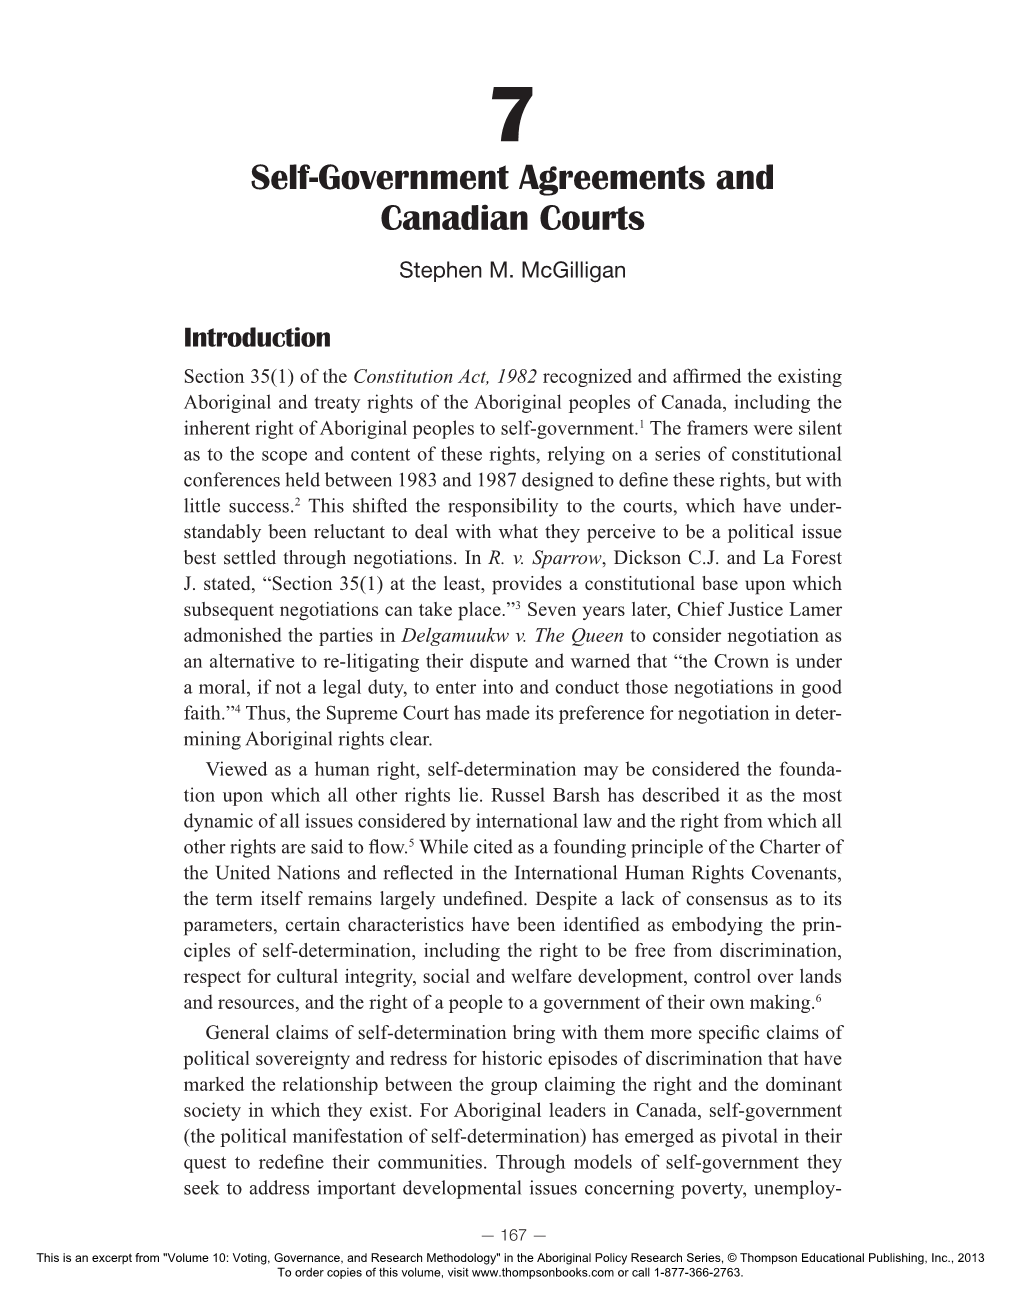 7. Self-Government Agreements and Canadian Courts